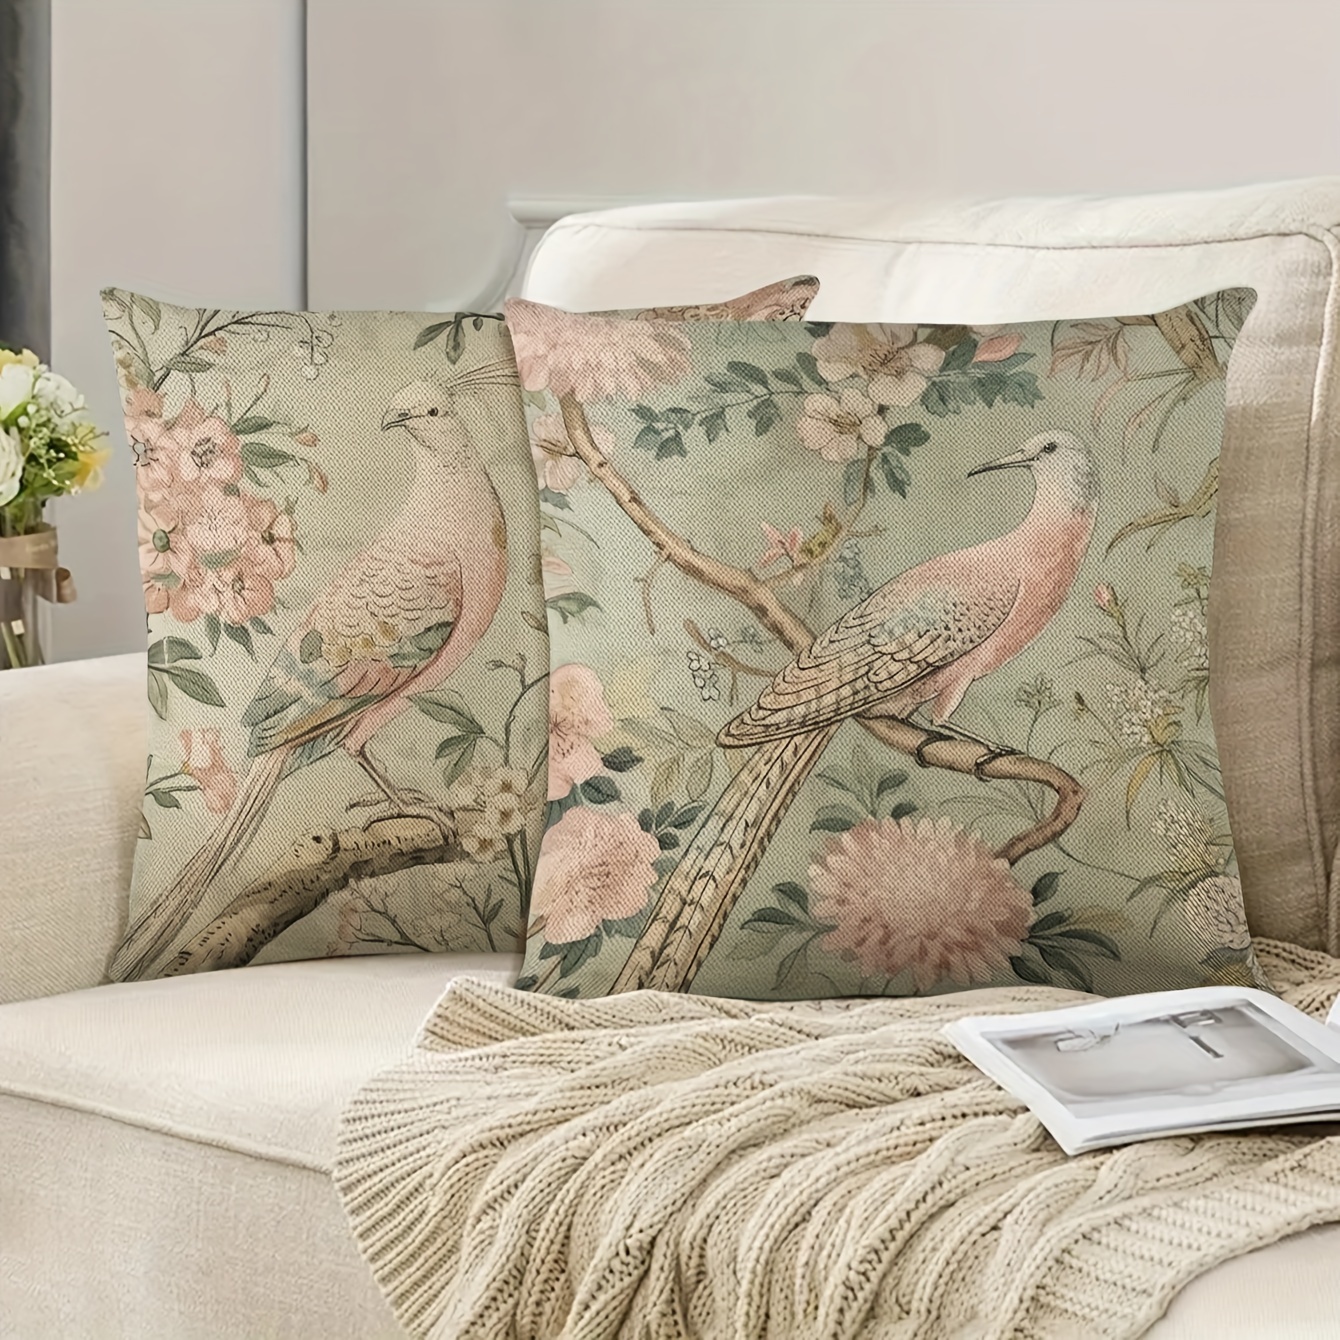 

2-piece Vintage Bird Design Linen Pillowcases 18x18 Inches - Zippered, Machine Washable Covers For Sofa, Bed, And Car Decor (inserts Not Included)